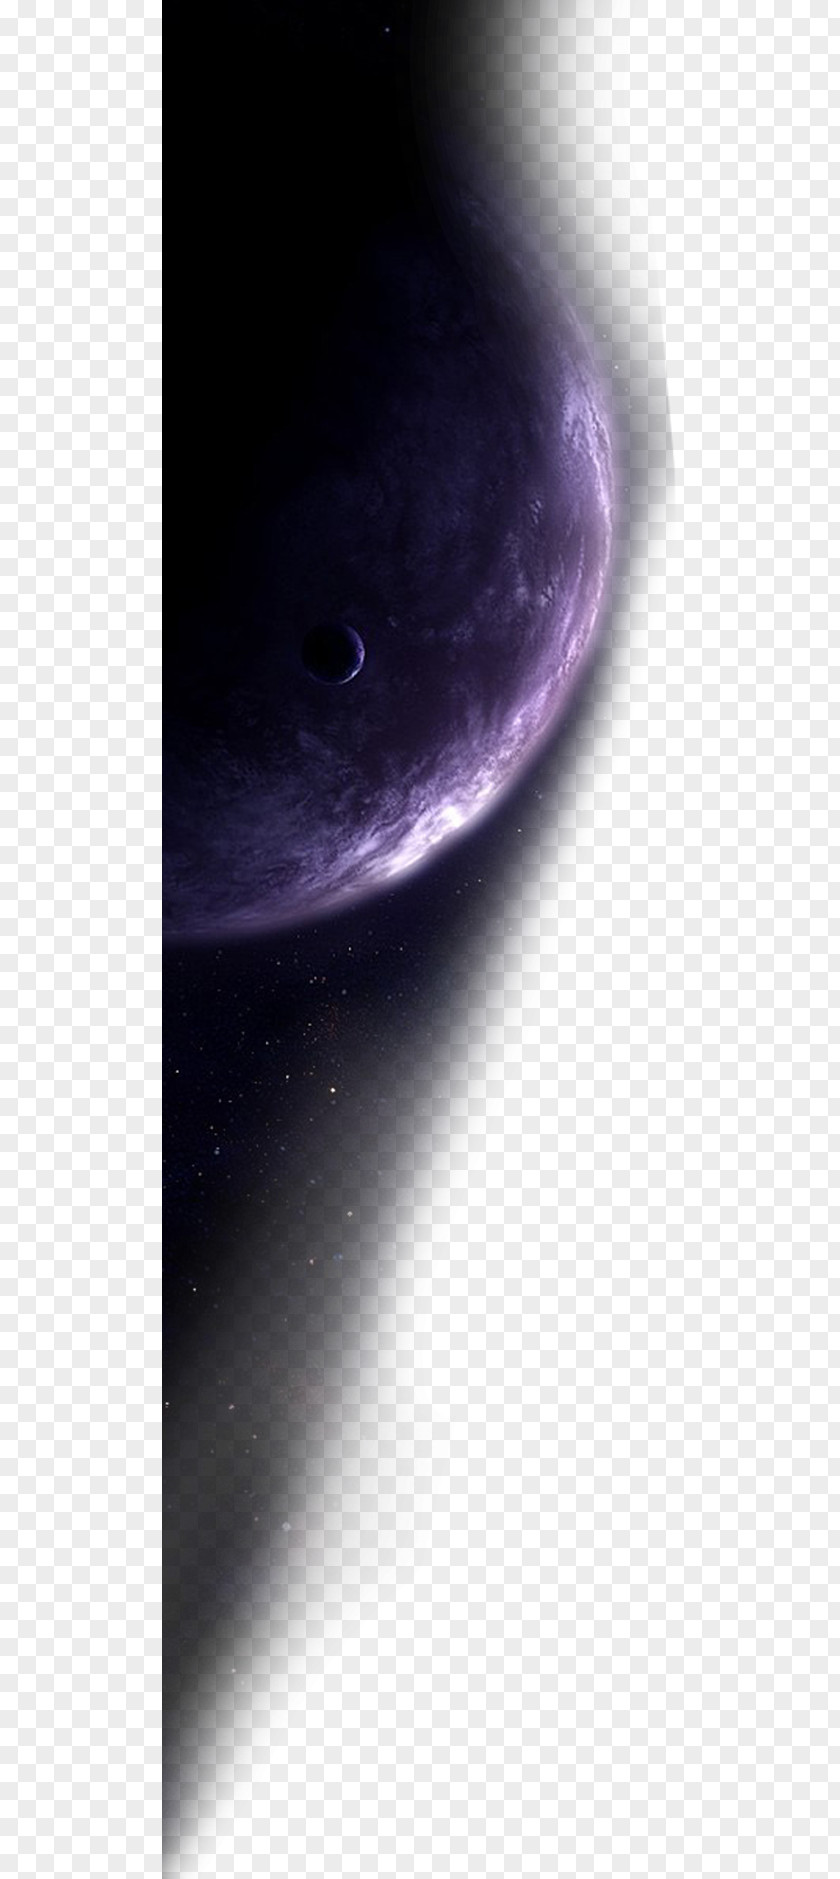 Luminescent Planet PNG